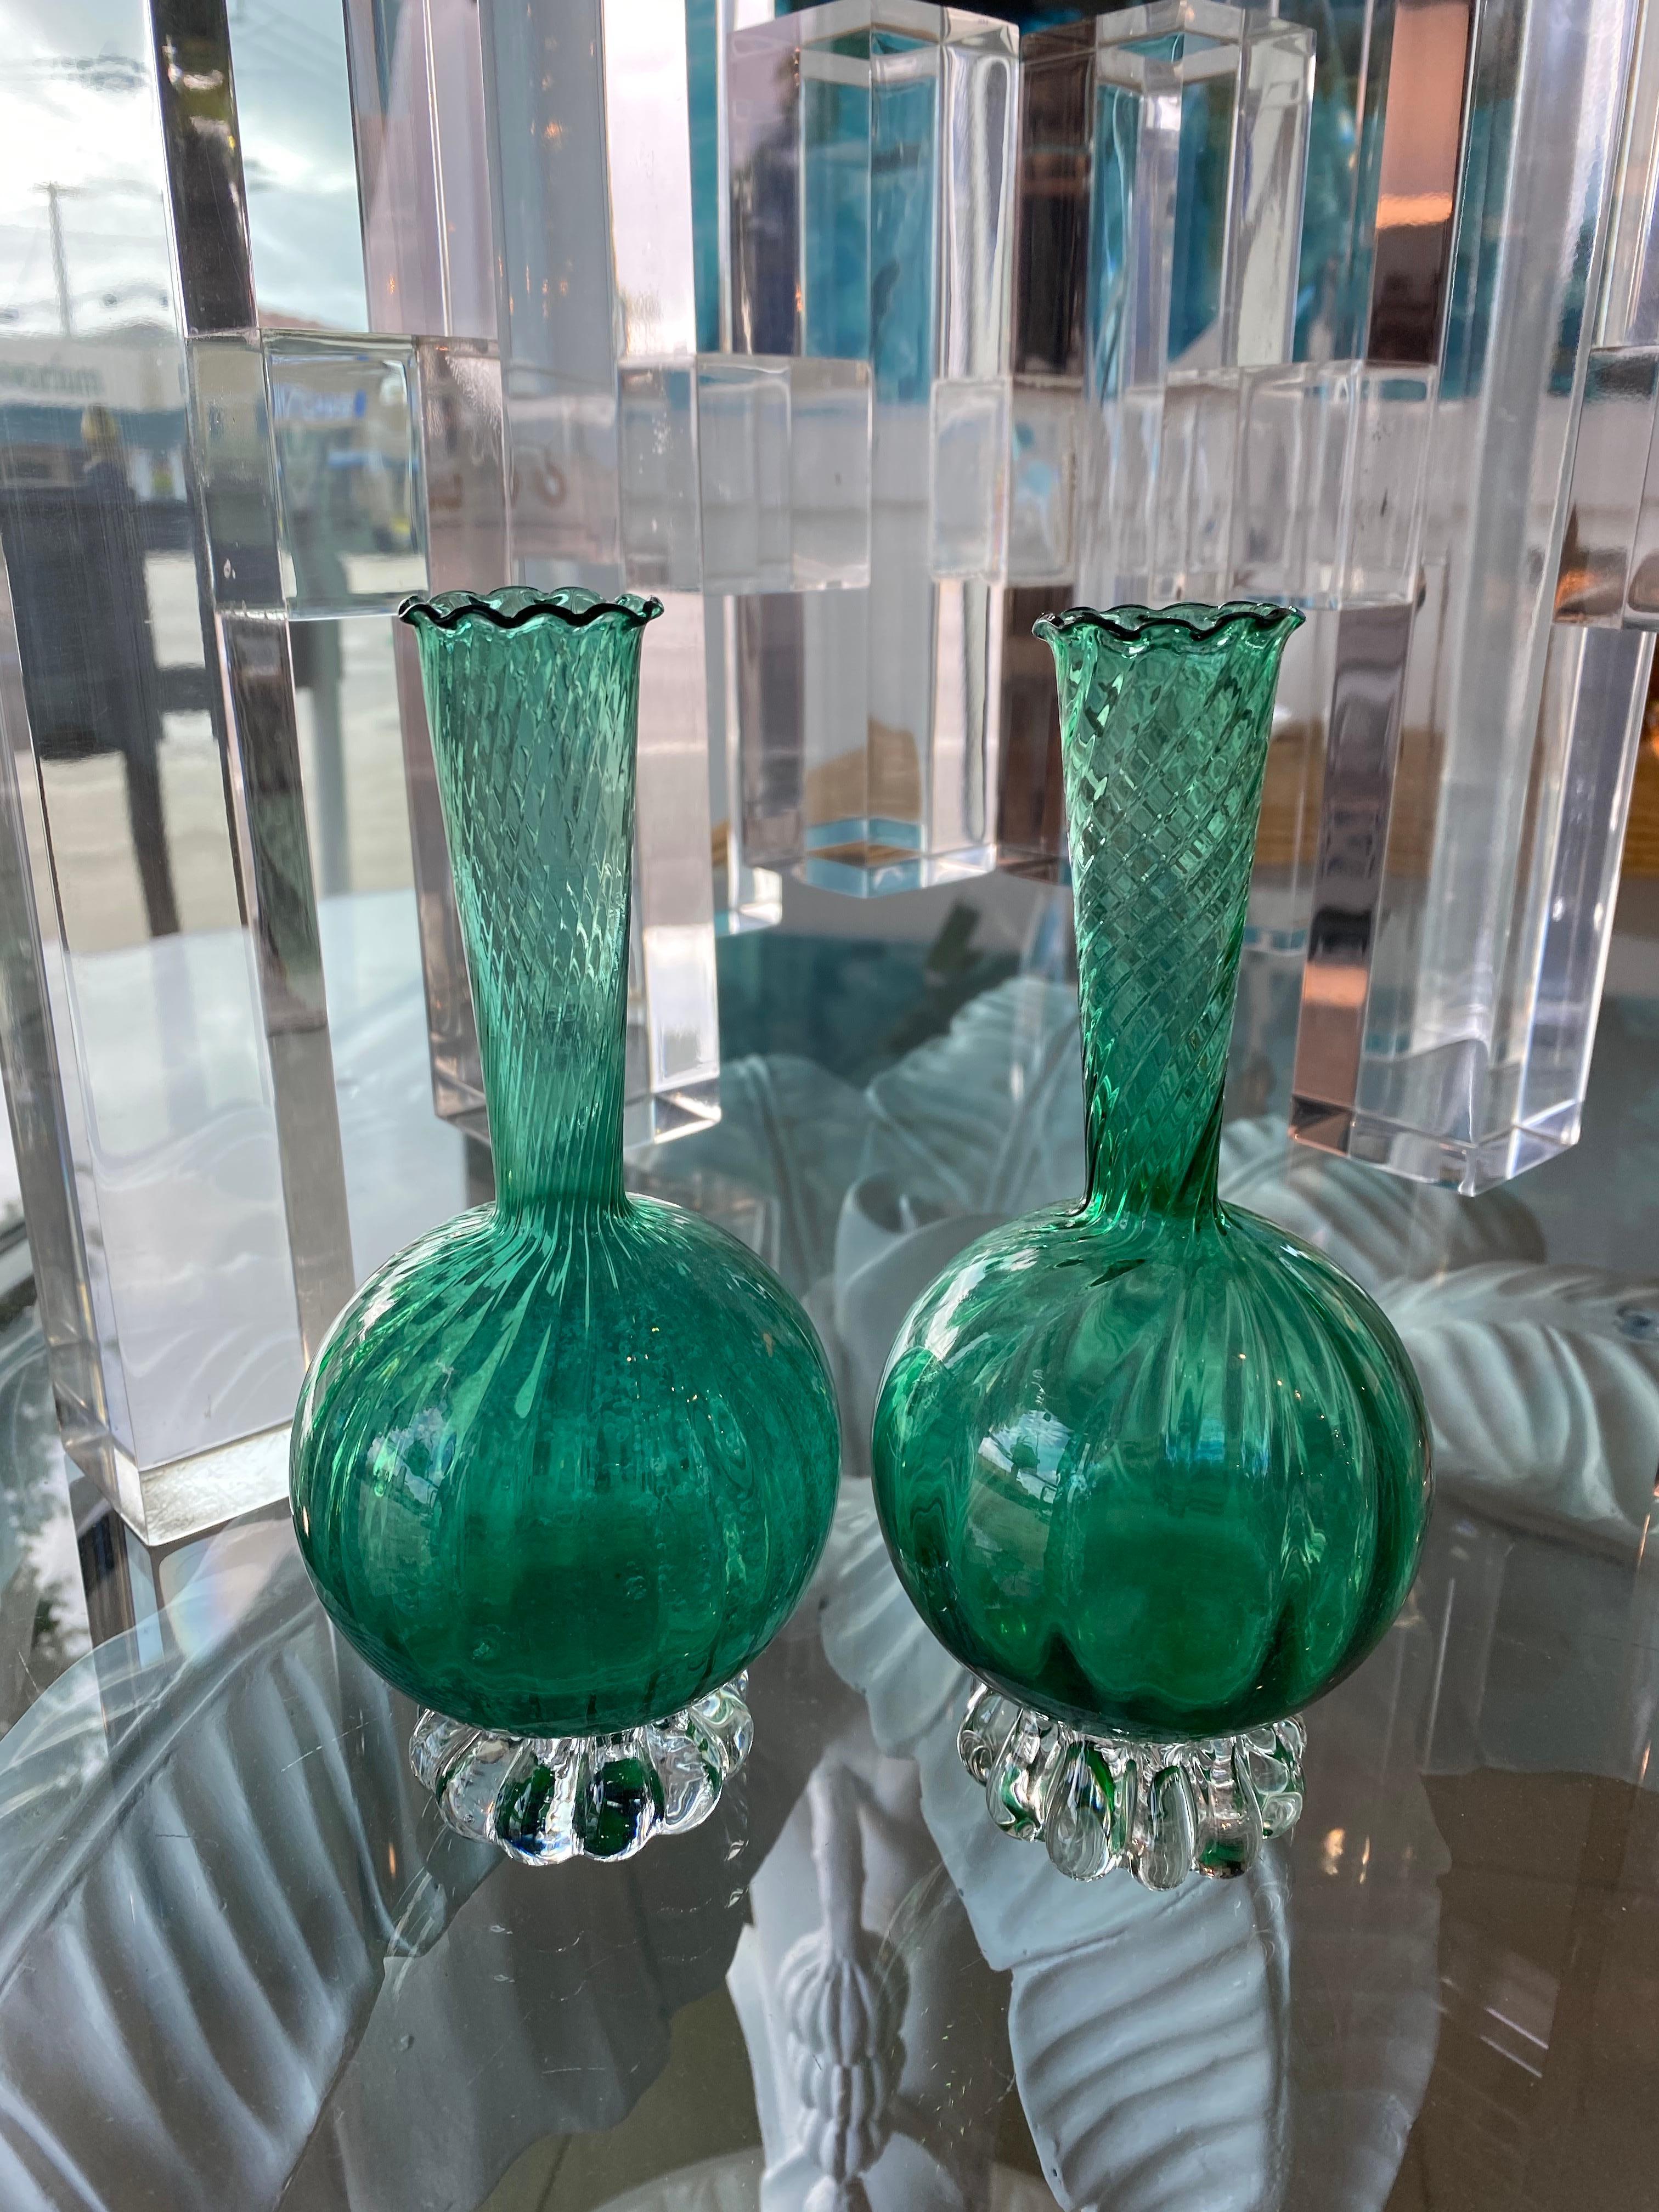 Lovely pair of vintage Murano bud vases in a beautiful emerald green color. No chips or breaks.